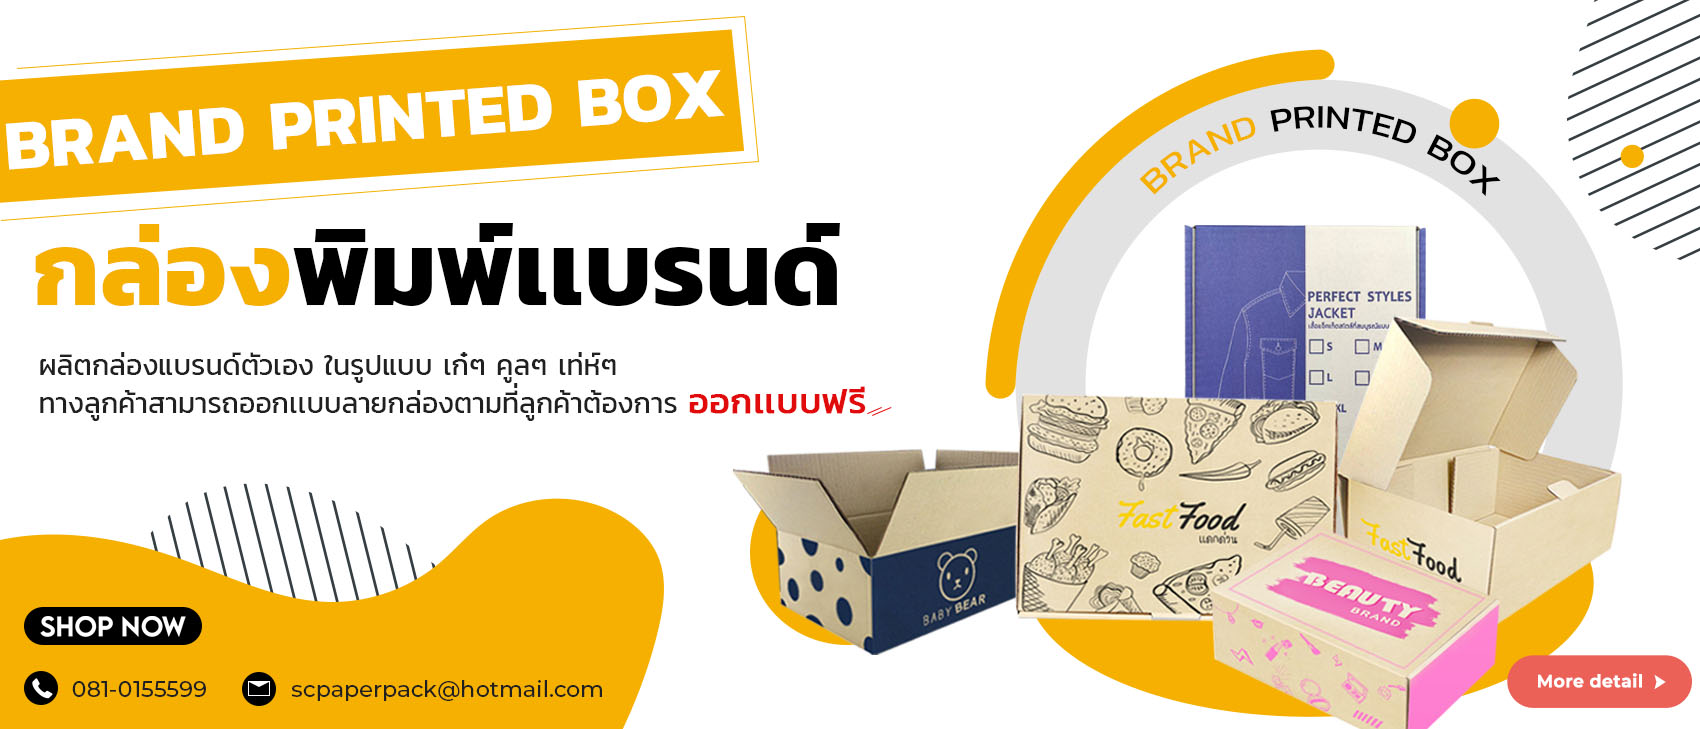 Made to order box